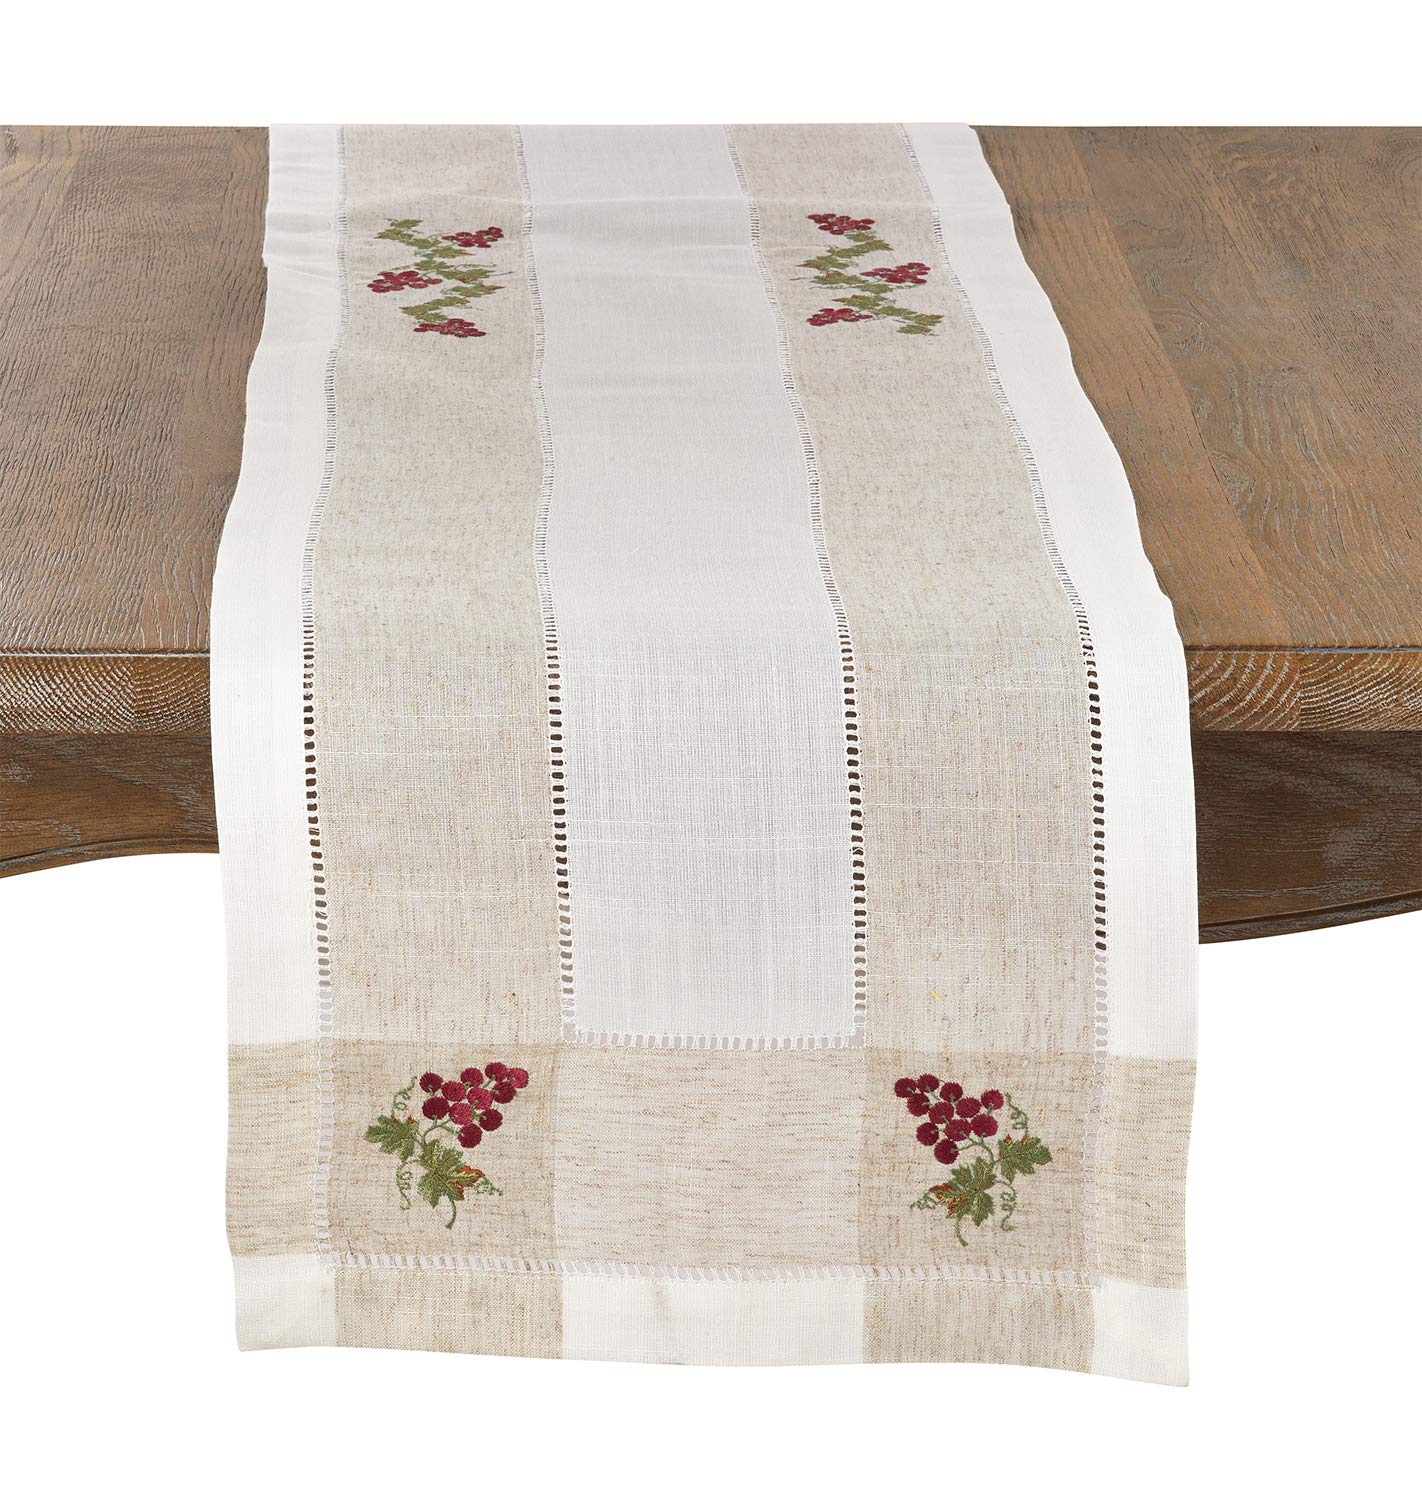 Fennco Styles Hommage Brodé Collection Cottage Lemon Embroidery Border Hemstitch Table Runner 15 x 70 Inch – Ivory Table Cover for Wedding, Banquet, Tea Party and Home Décor